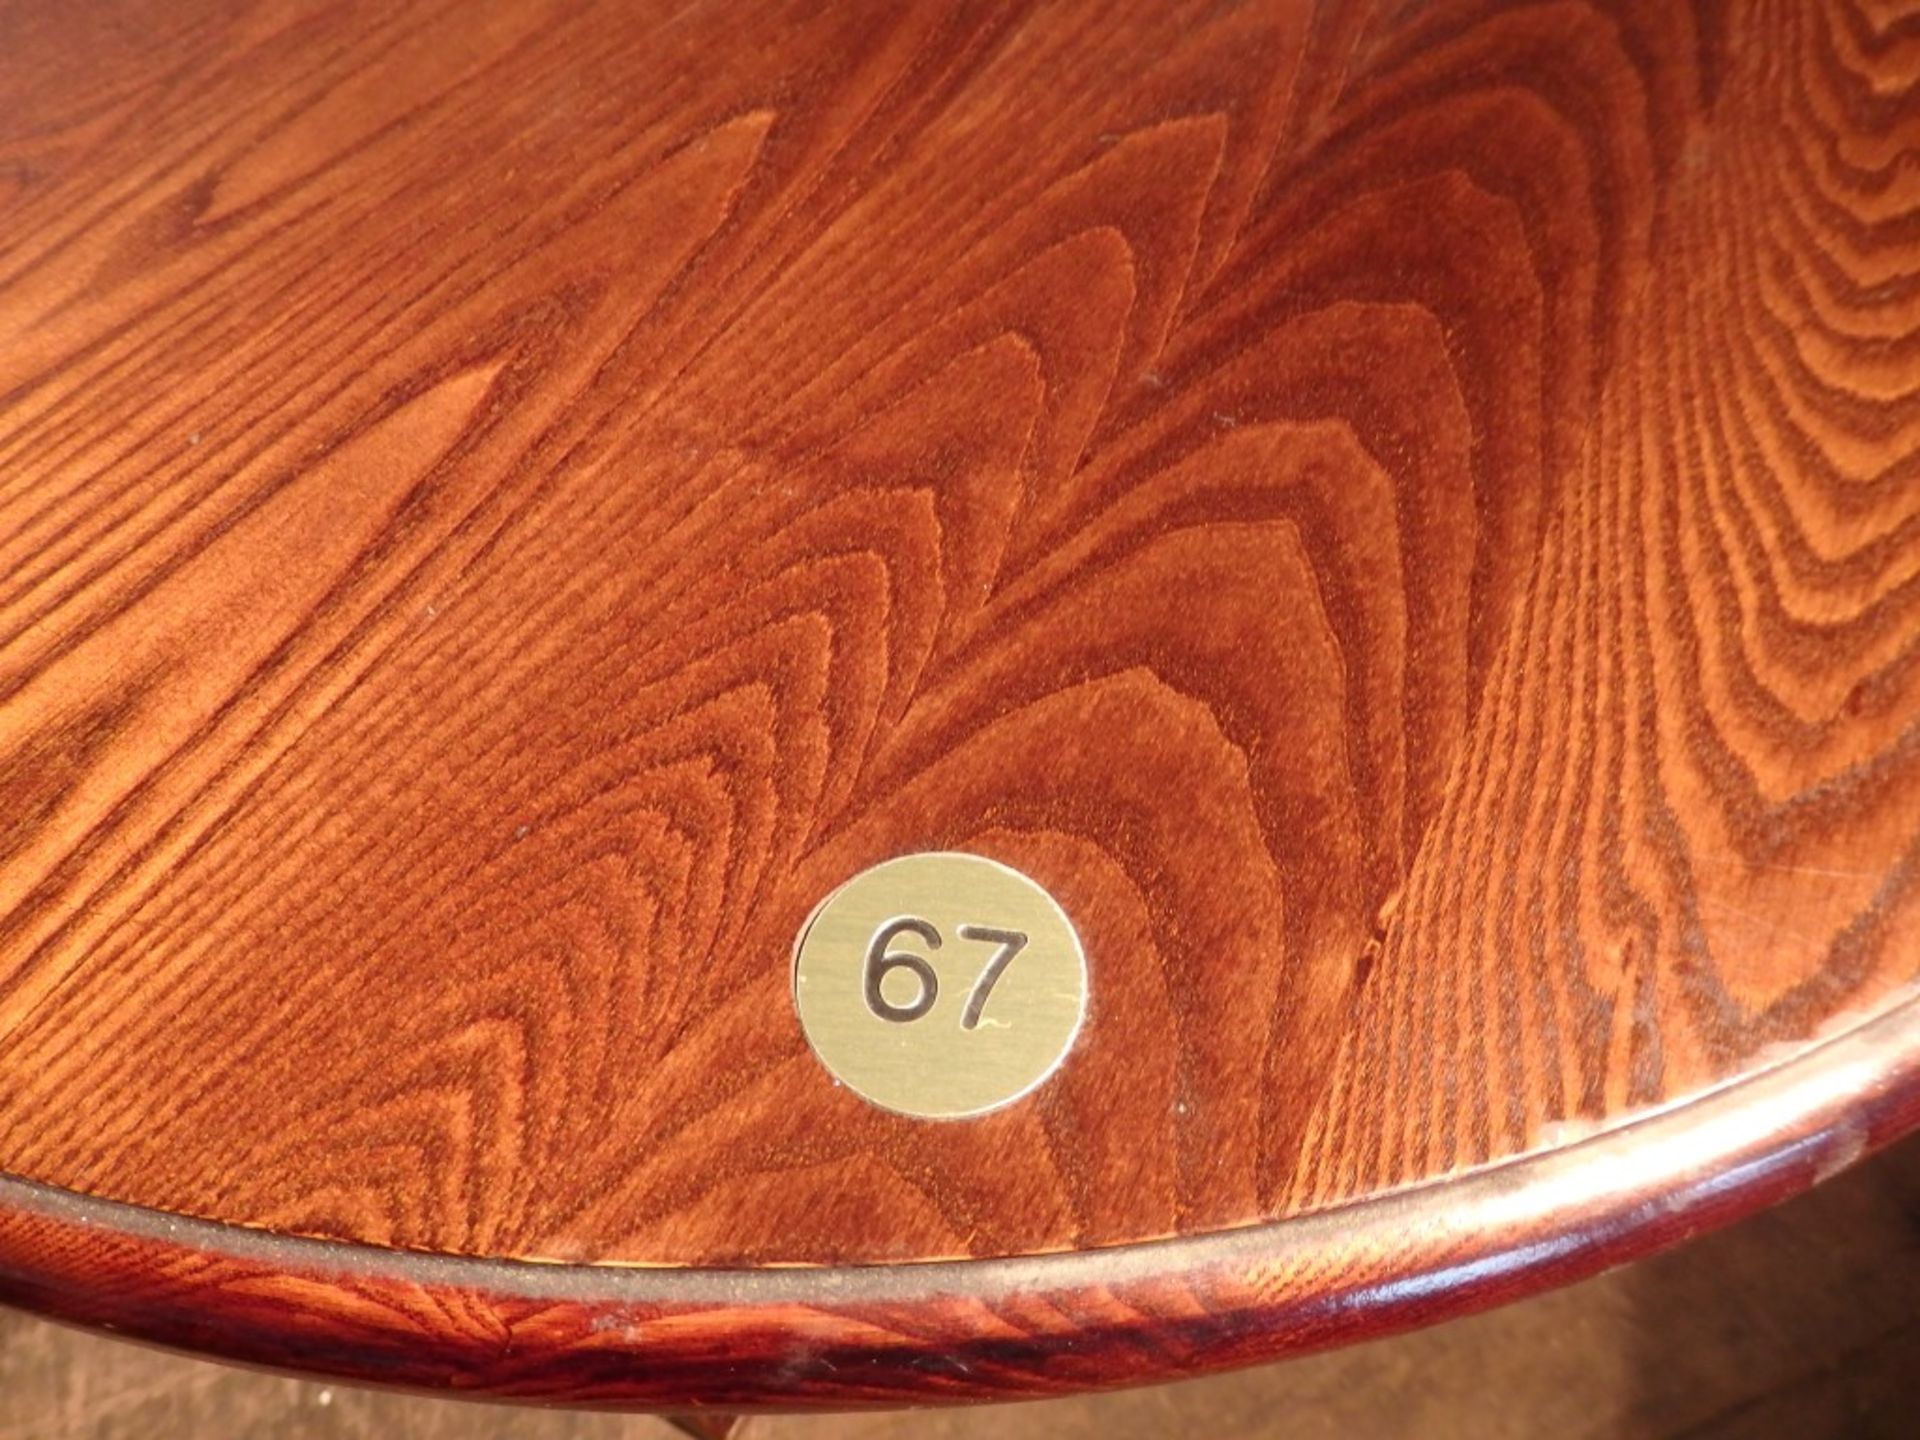 1 x Round Solid Wood Bistro Table - Recently Taken From A Bar & Restaurant Environment - Dimensions: - Image 4 of 5